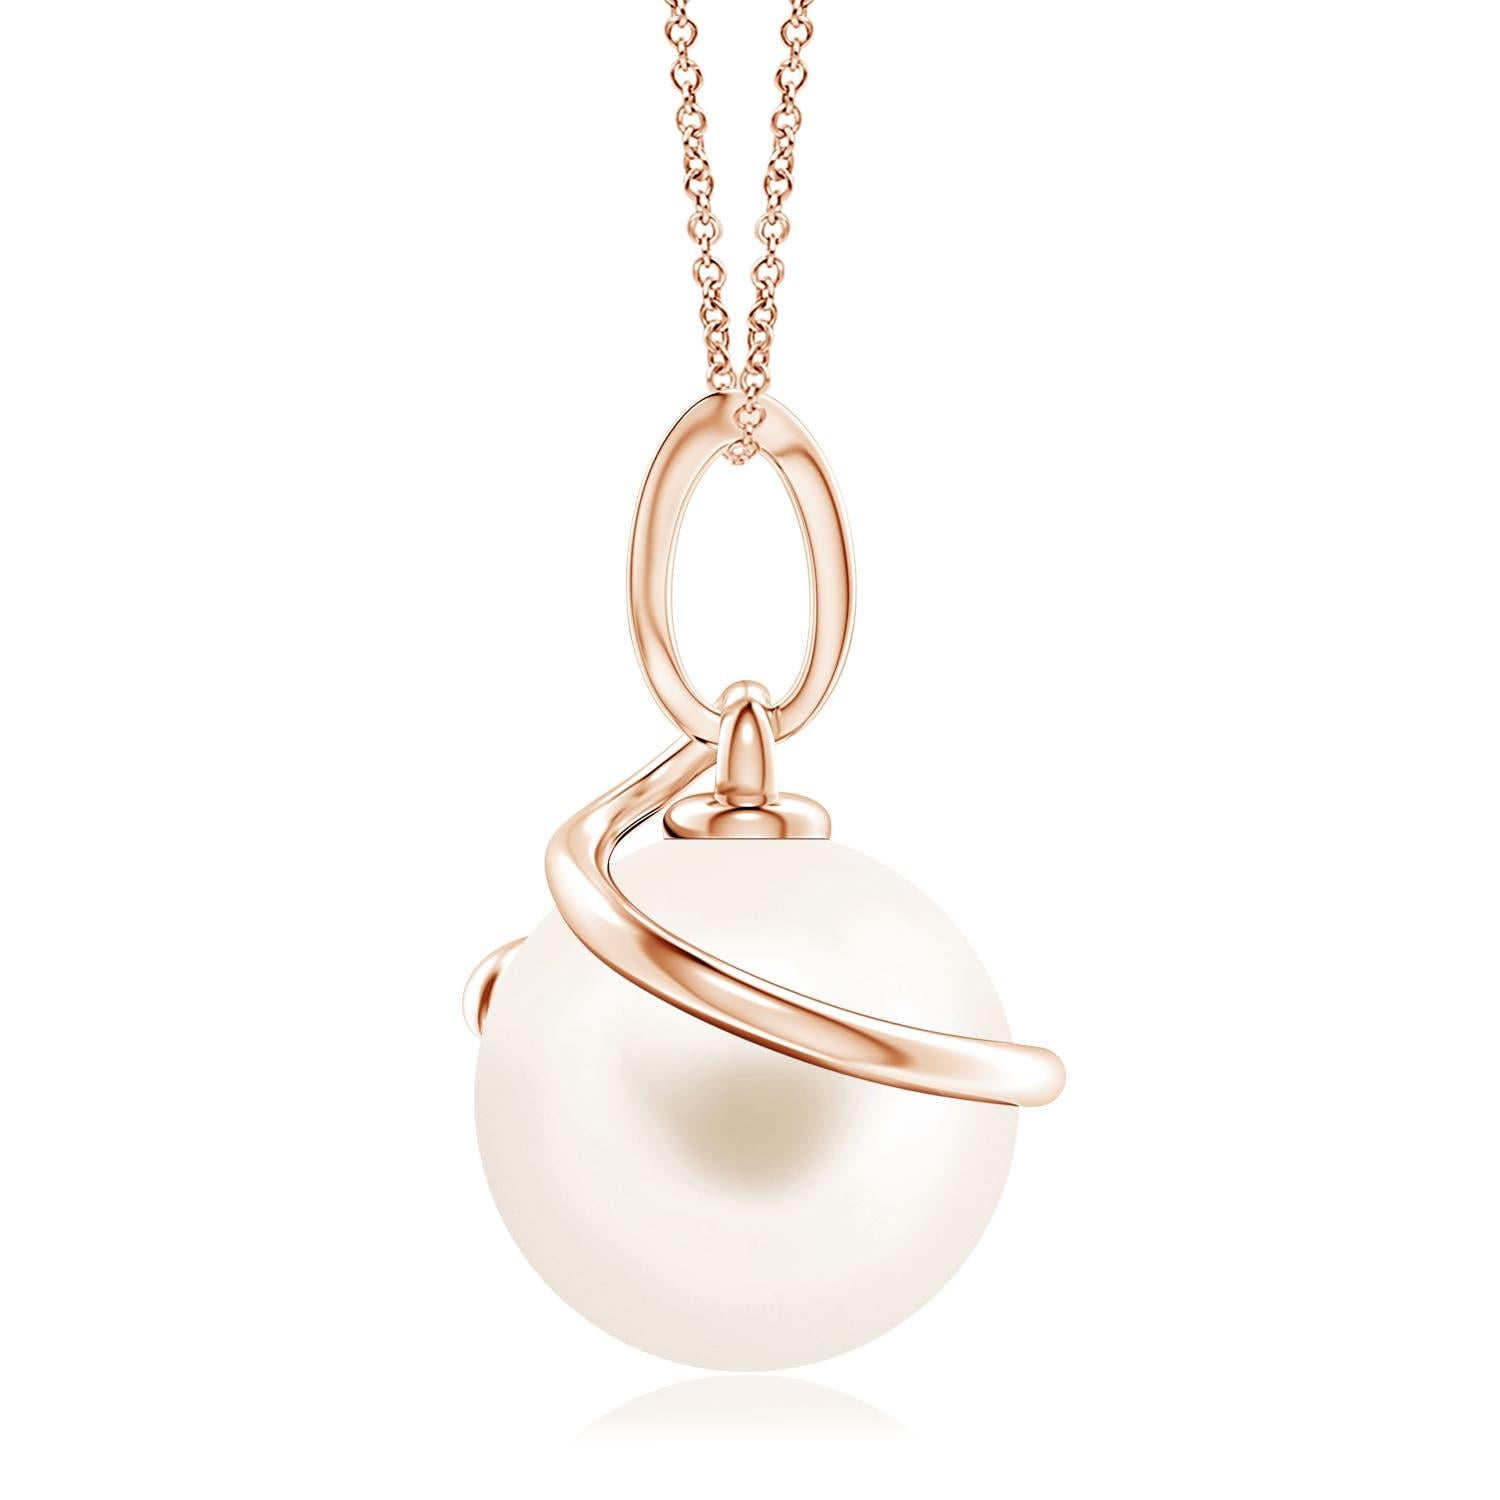 Give an elegant twist to your looks with this Freshwater cultured pearl pendant, crafted in 14k rose gold. The beautiful pearl is wrapped by a spiral metal loop and linked to a diamond-studded bale.
Freshwater Cultured Pearl is the Birthstone for